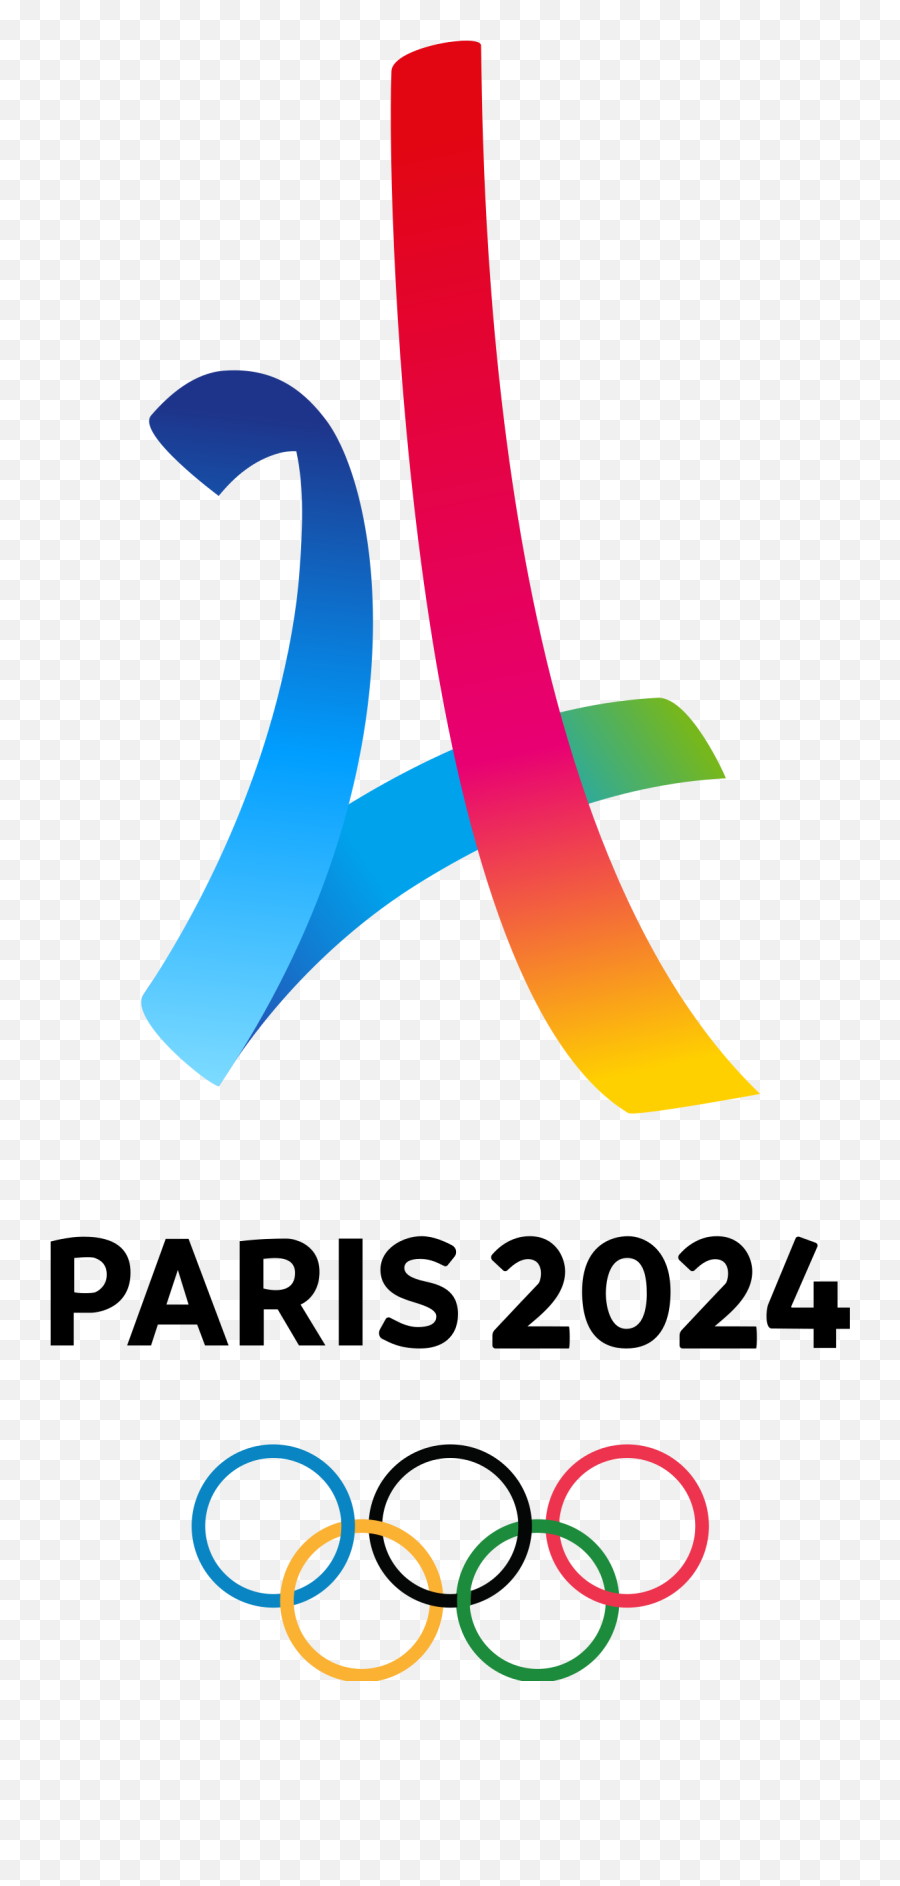 Logo For The 2024 Summer Olympics In Paris Unveiled - Sports Paris 2024 Olympics Logo Emoji,Olympics Emoji